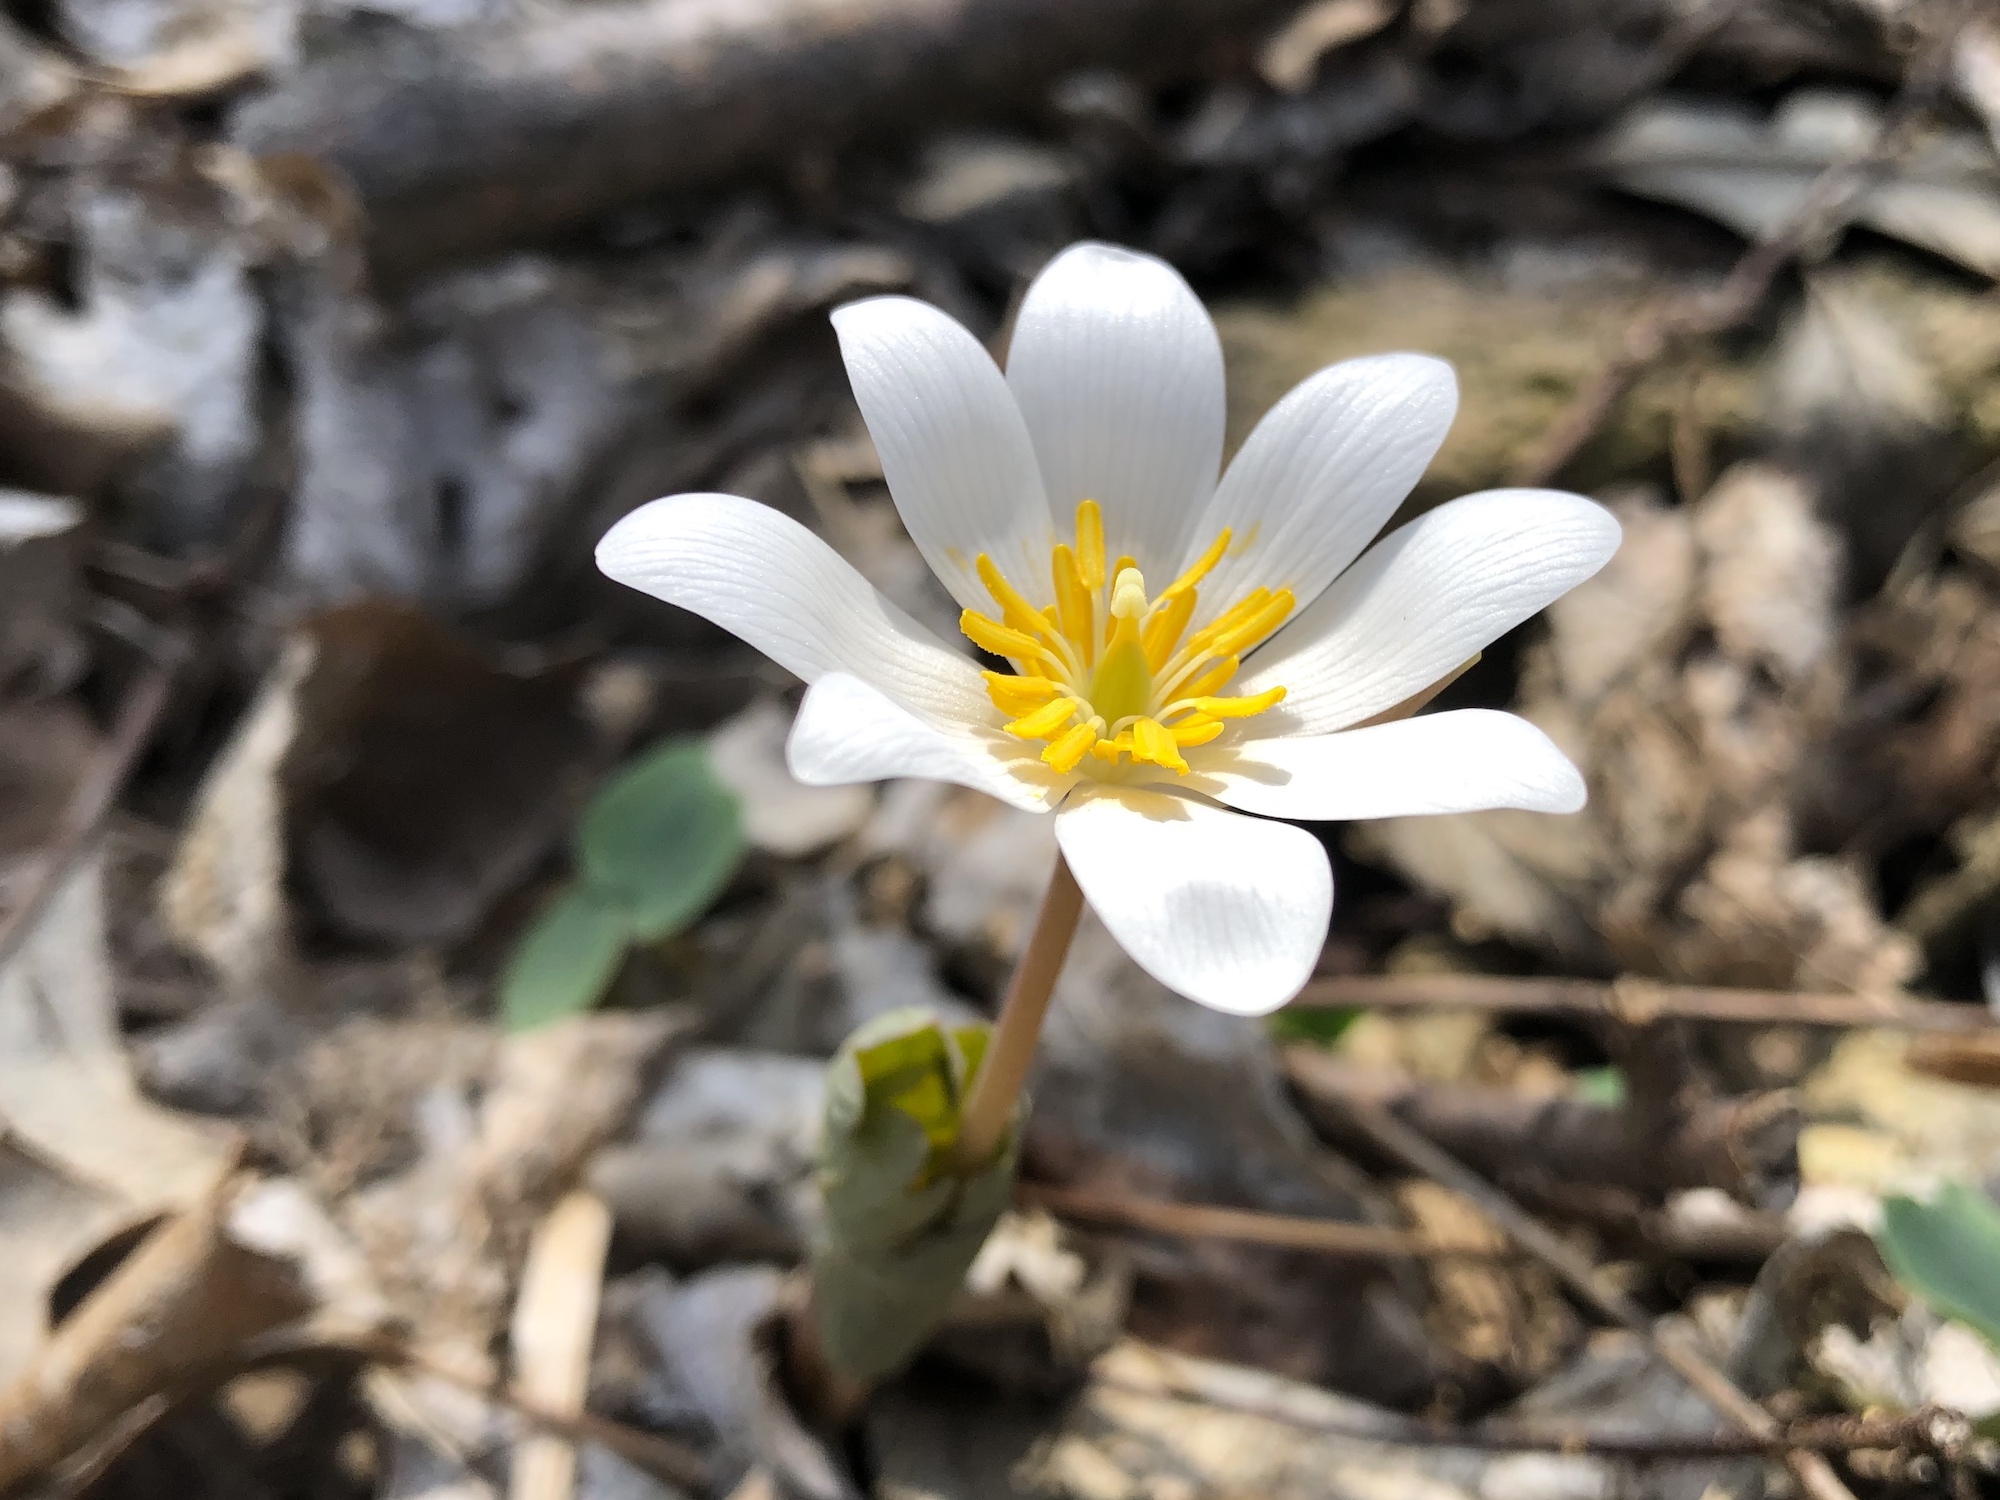 Bloodroot in Oak Savanna by Council Ring in Madison, Wisconsin on April 7, 2020.